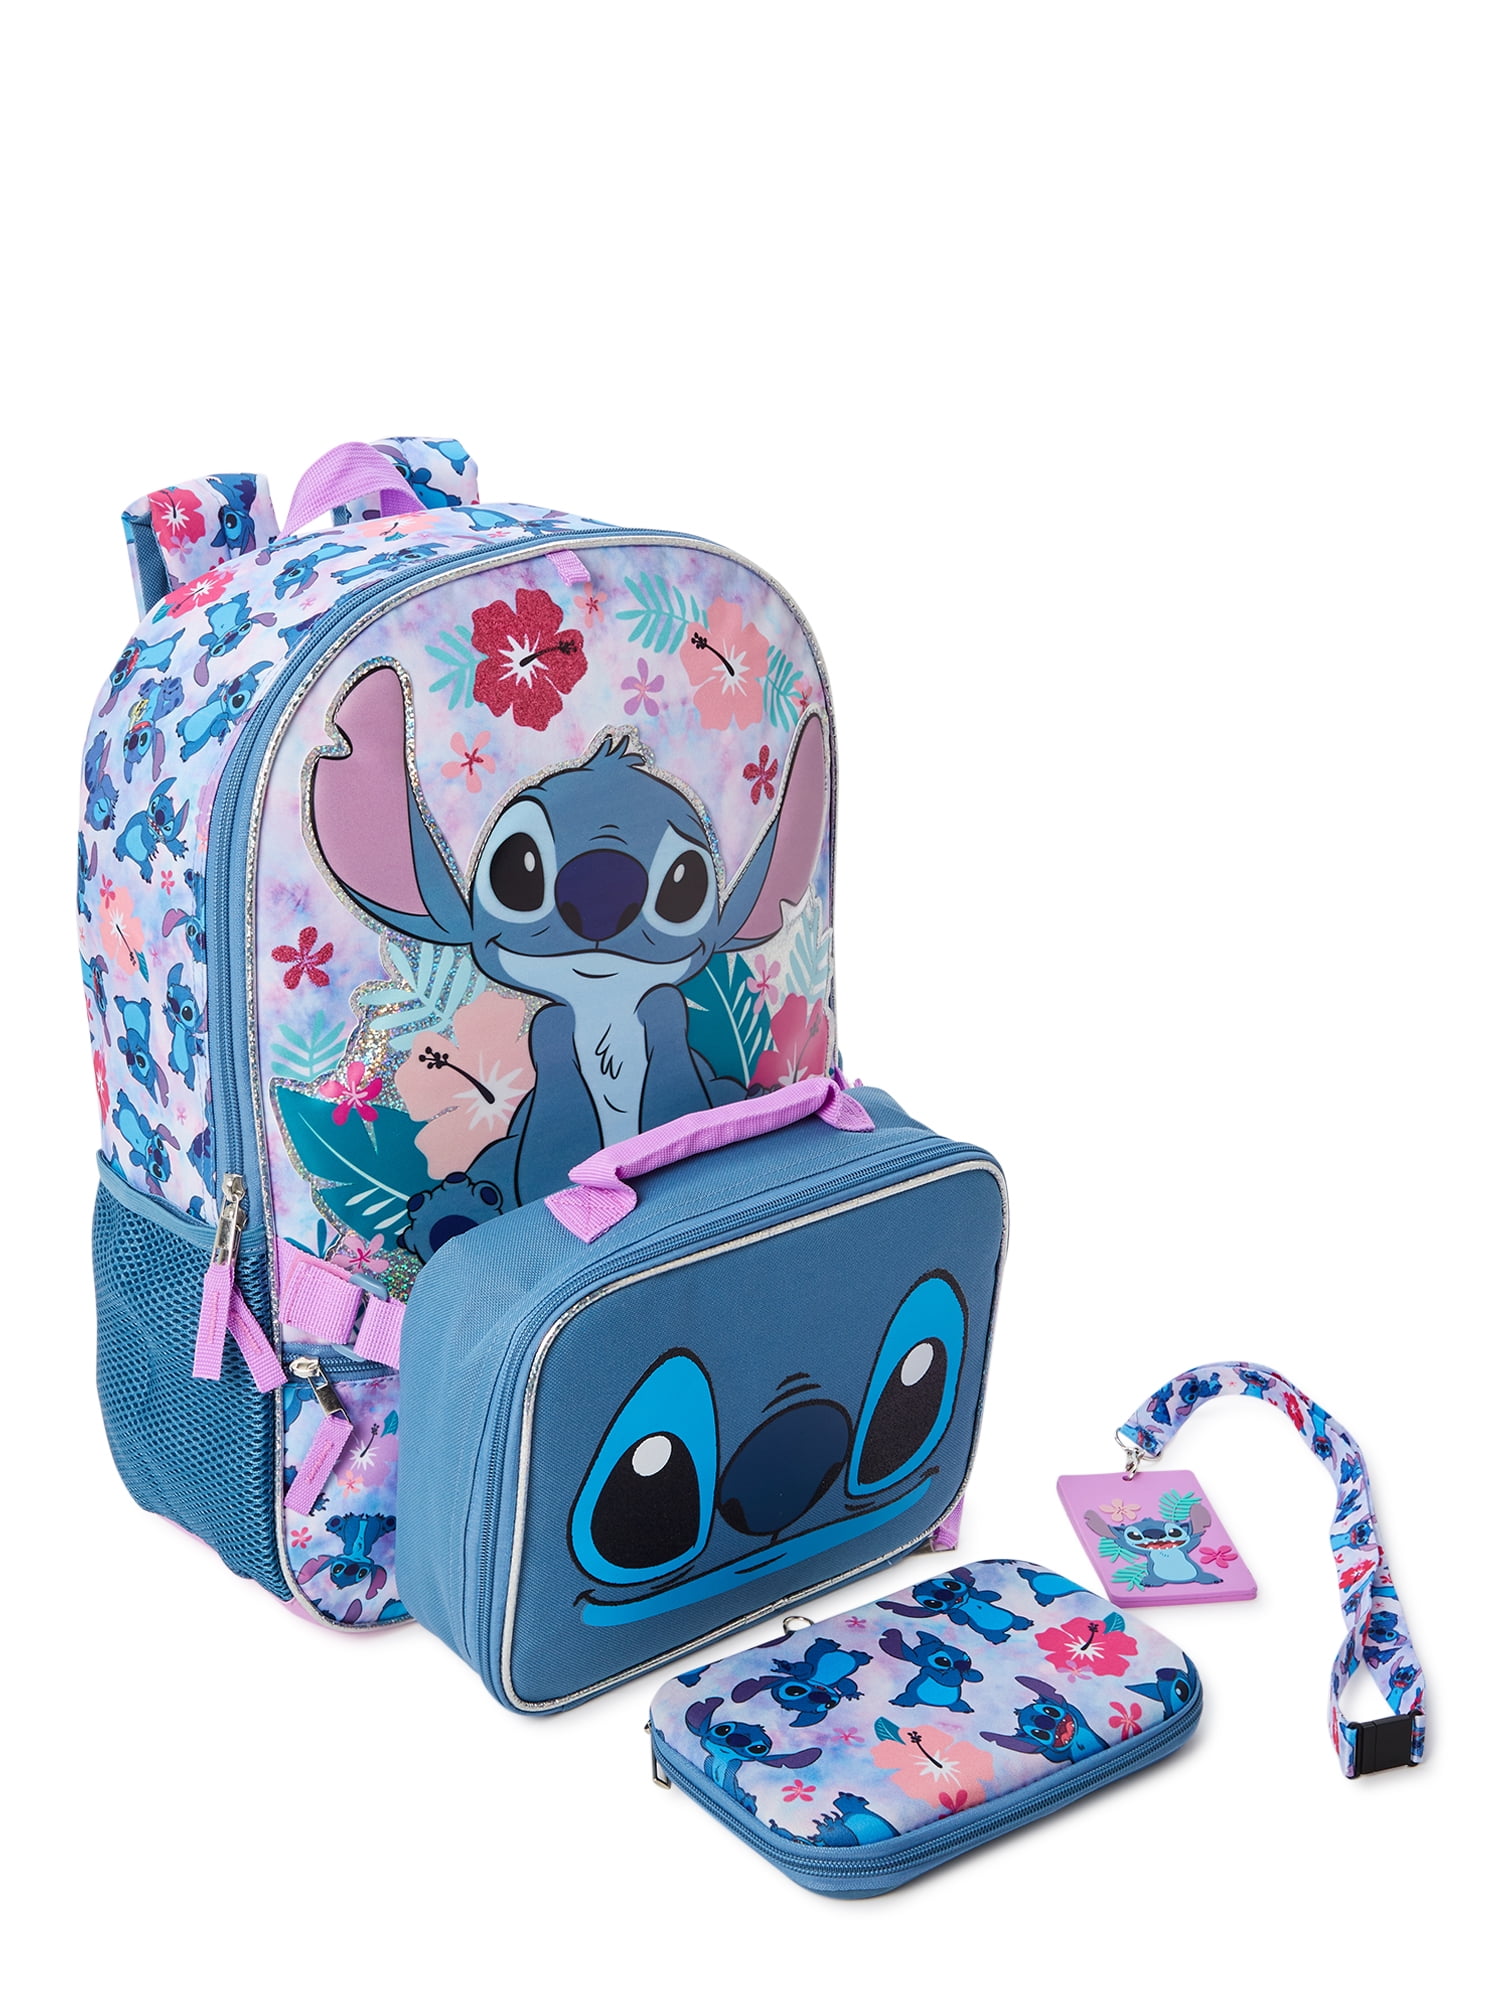 Disney Lilo and Stitch Backpack and Lunch Box Bundle - 4 Pc Set With 16  Stitch Print All Over School Bag, Stitch Lunch Bag, and More For Boys And